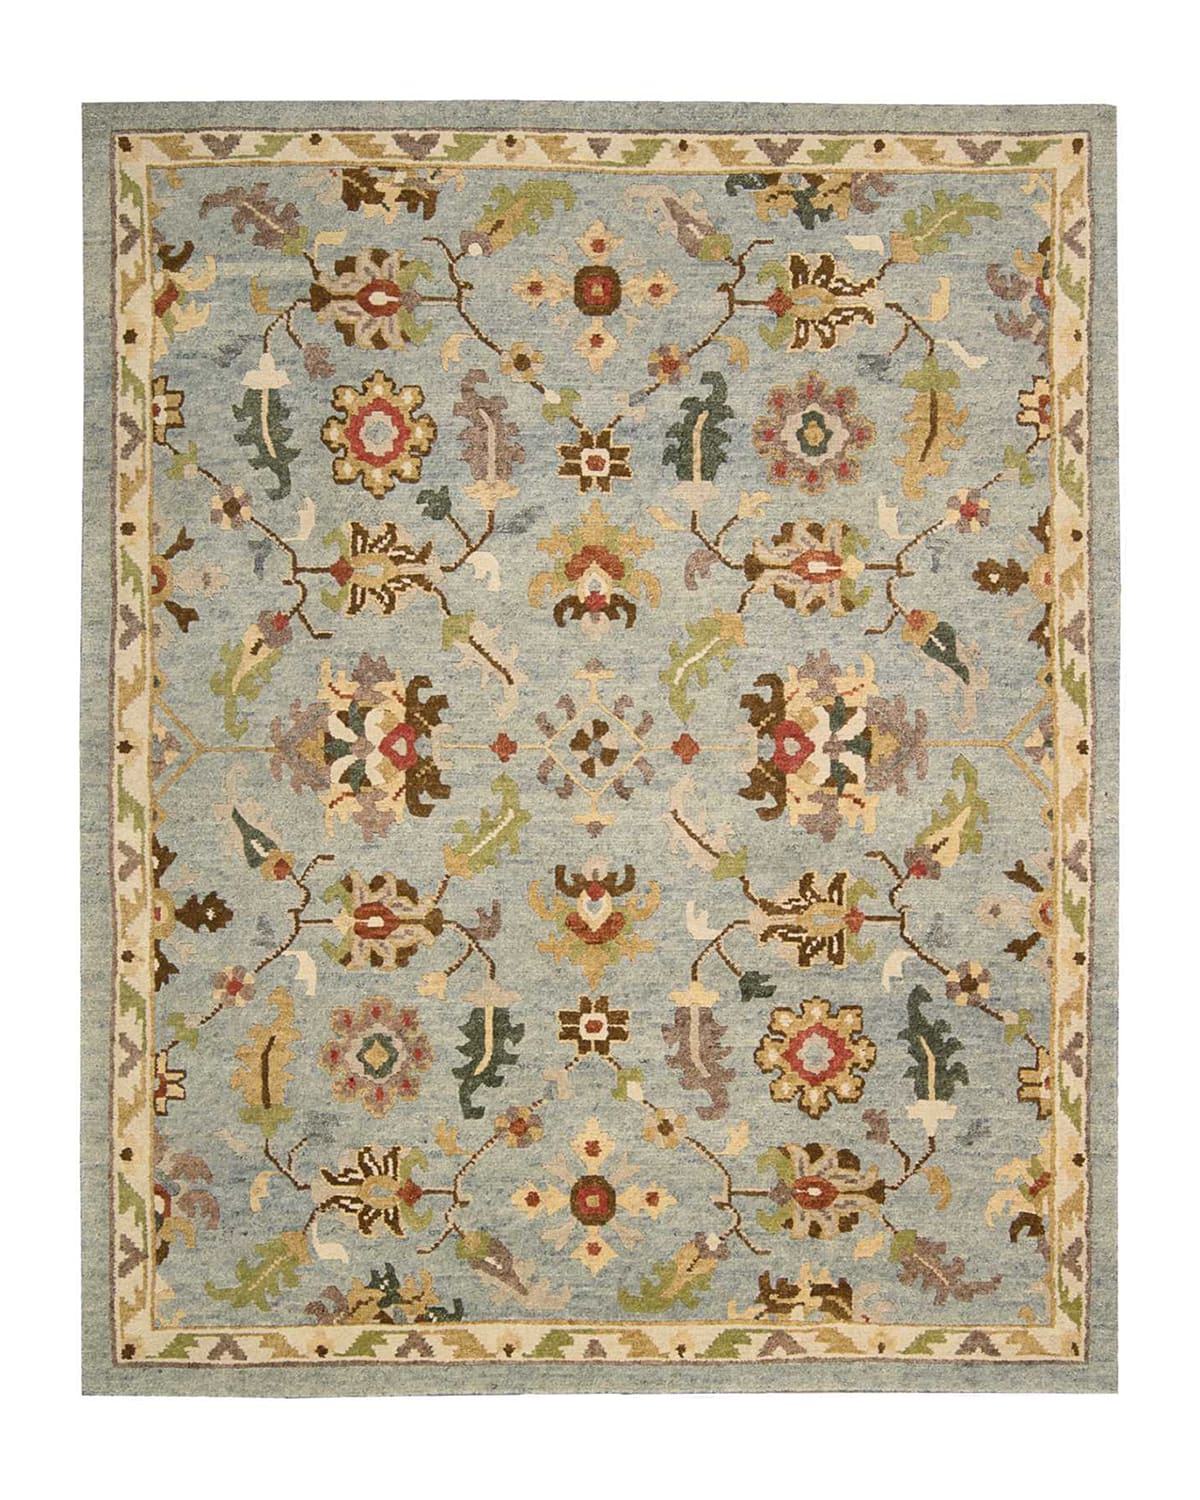 Echo Garden Rug, 6' x 9inin,Hand knotted in Tibetan style of hand-spun wool. Enhanced with a special wash to create a beautiful